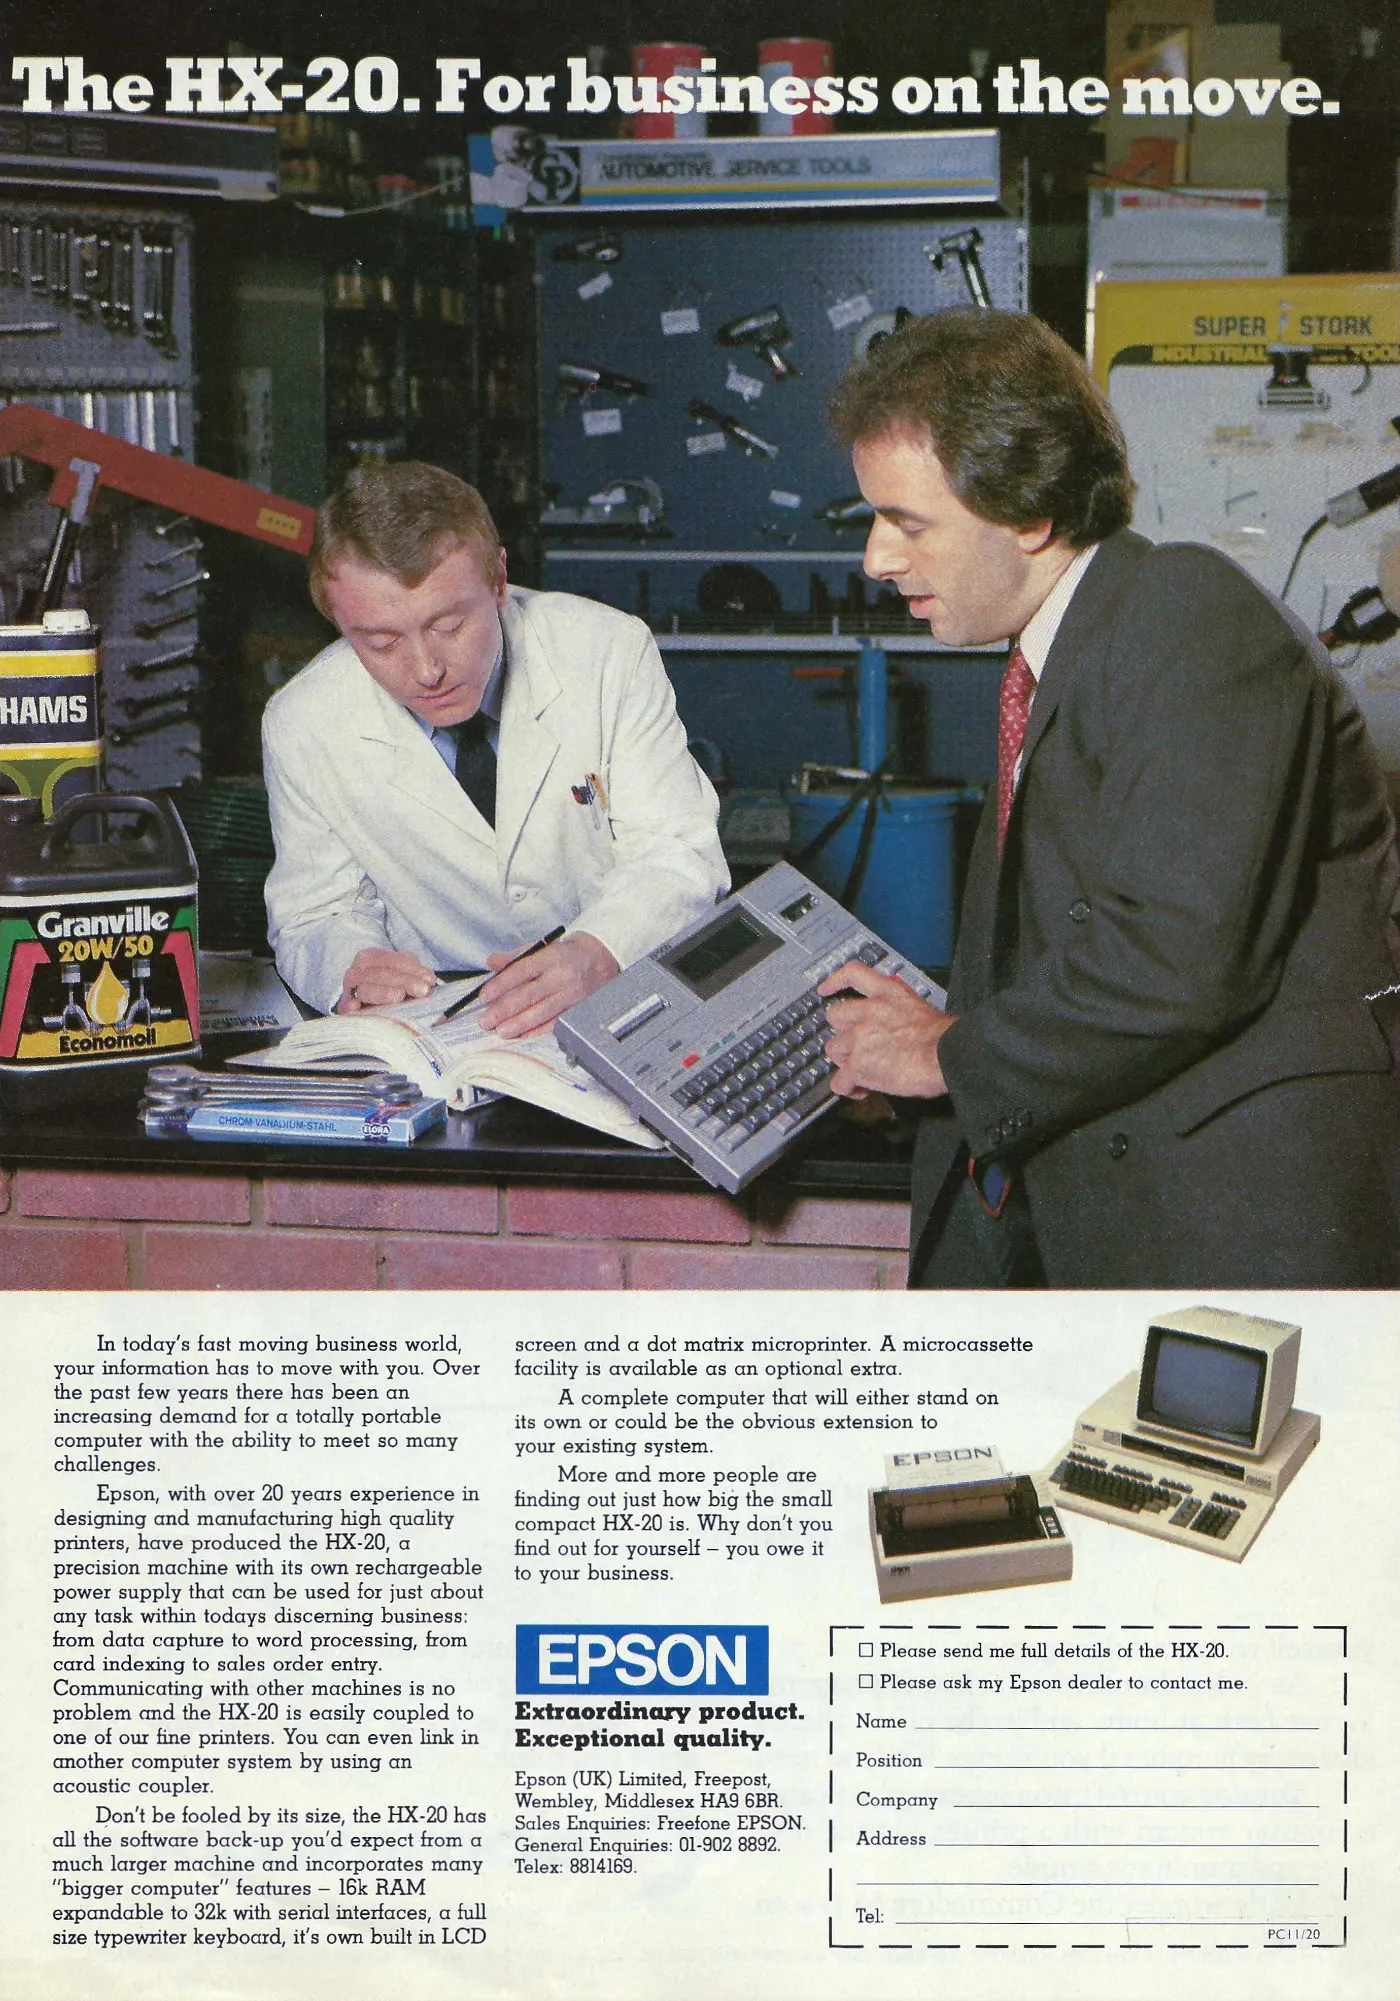 Epson Advert: <b>The Epson HX-20: for Business on the Move</b>, from Practical Computing, August 1983